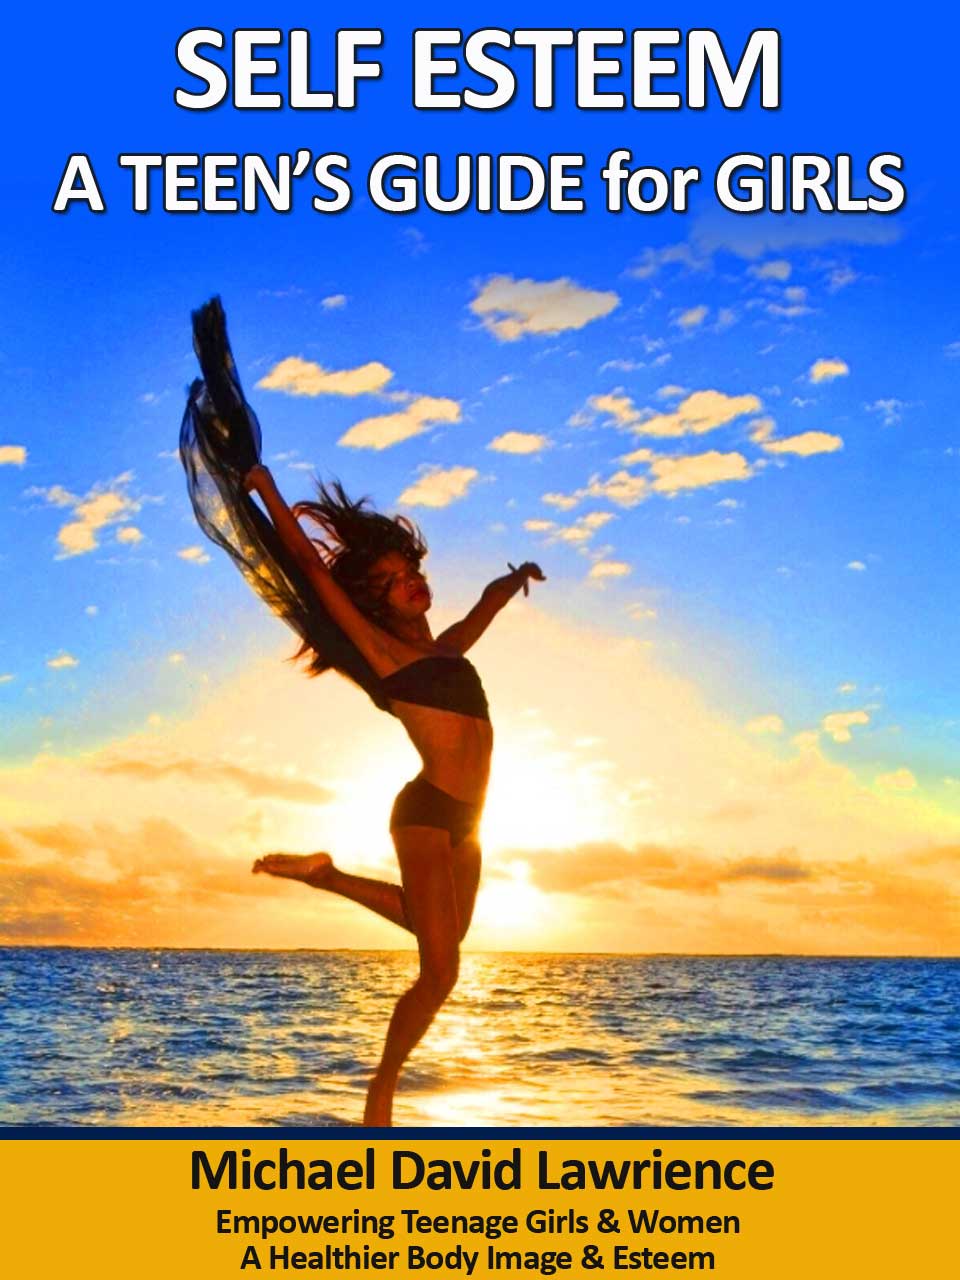 Self-Esteem: A Teen's Guide for Girls [Kindle Edition]